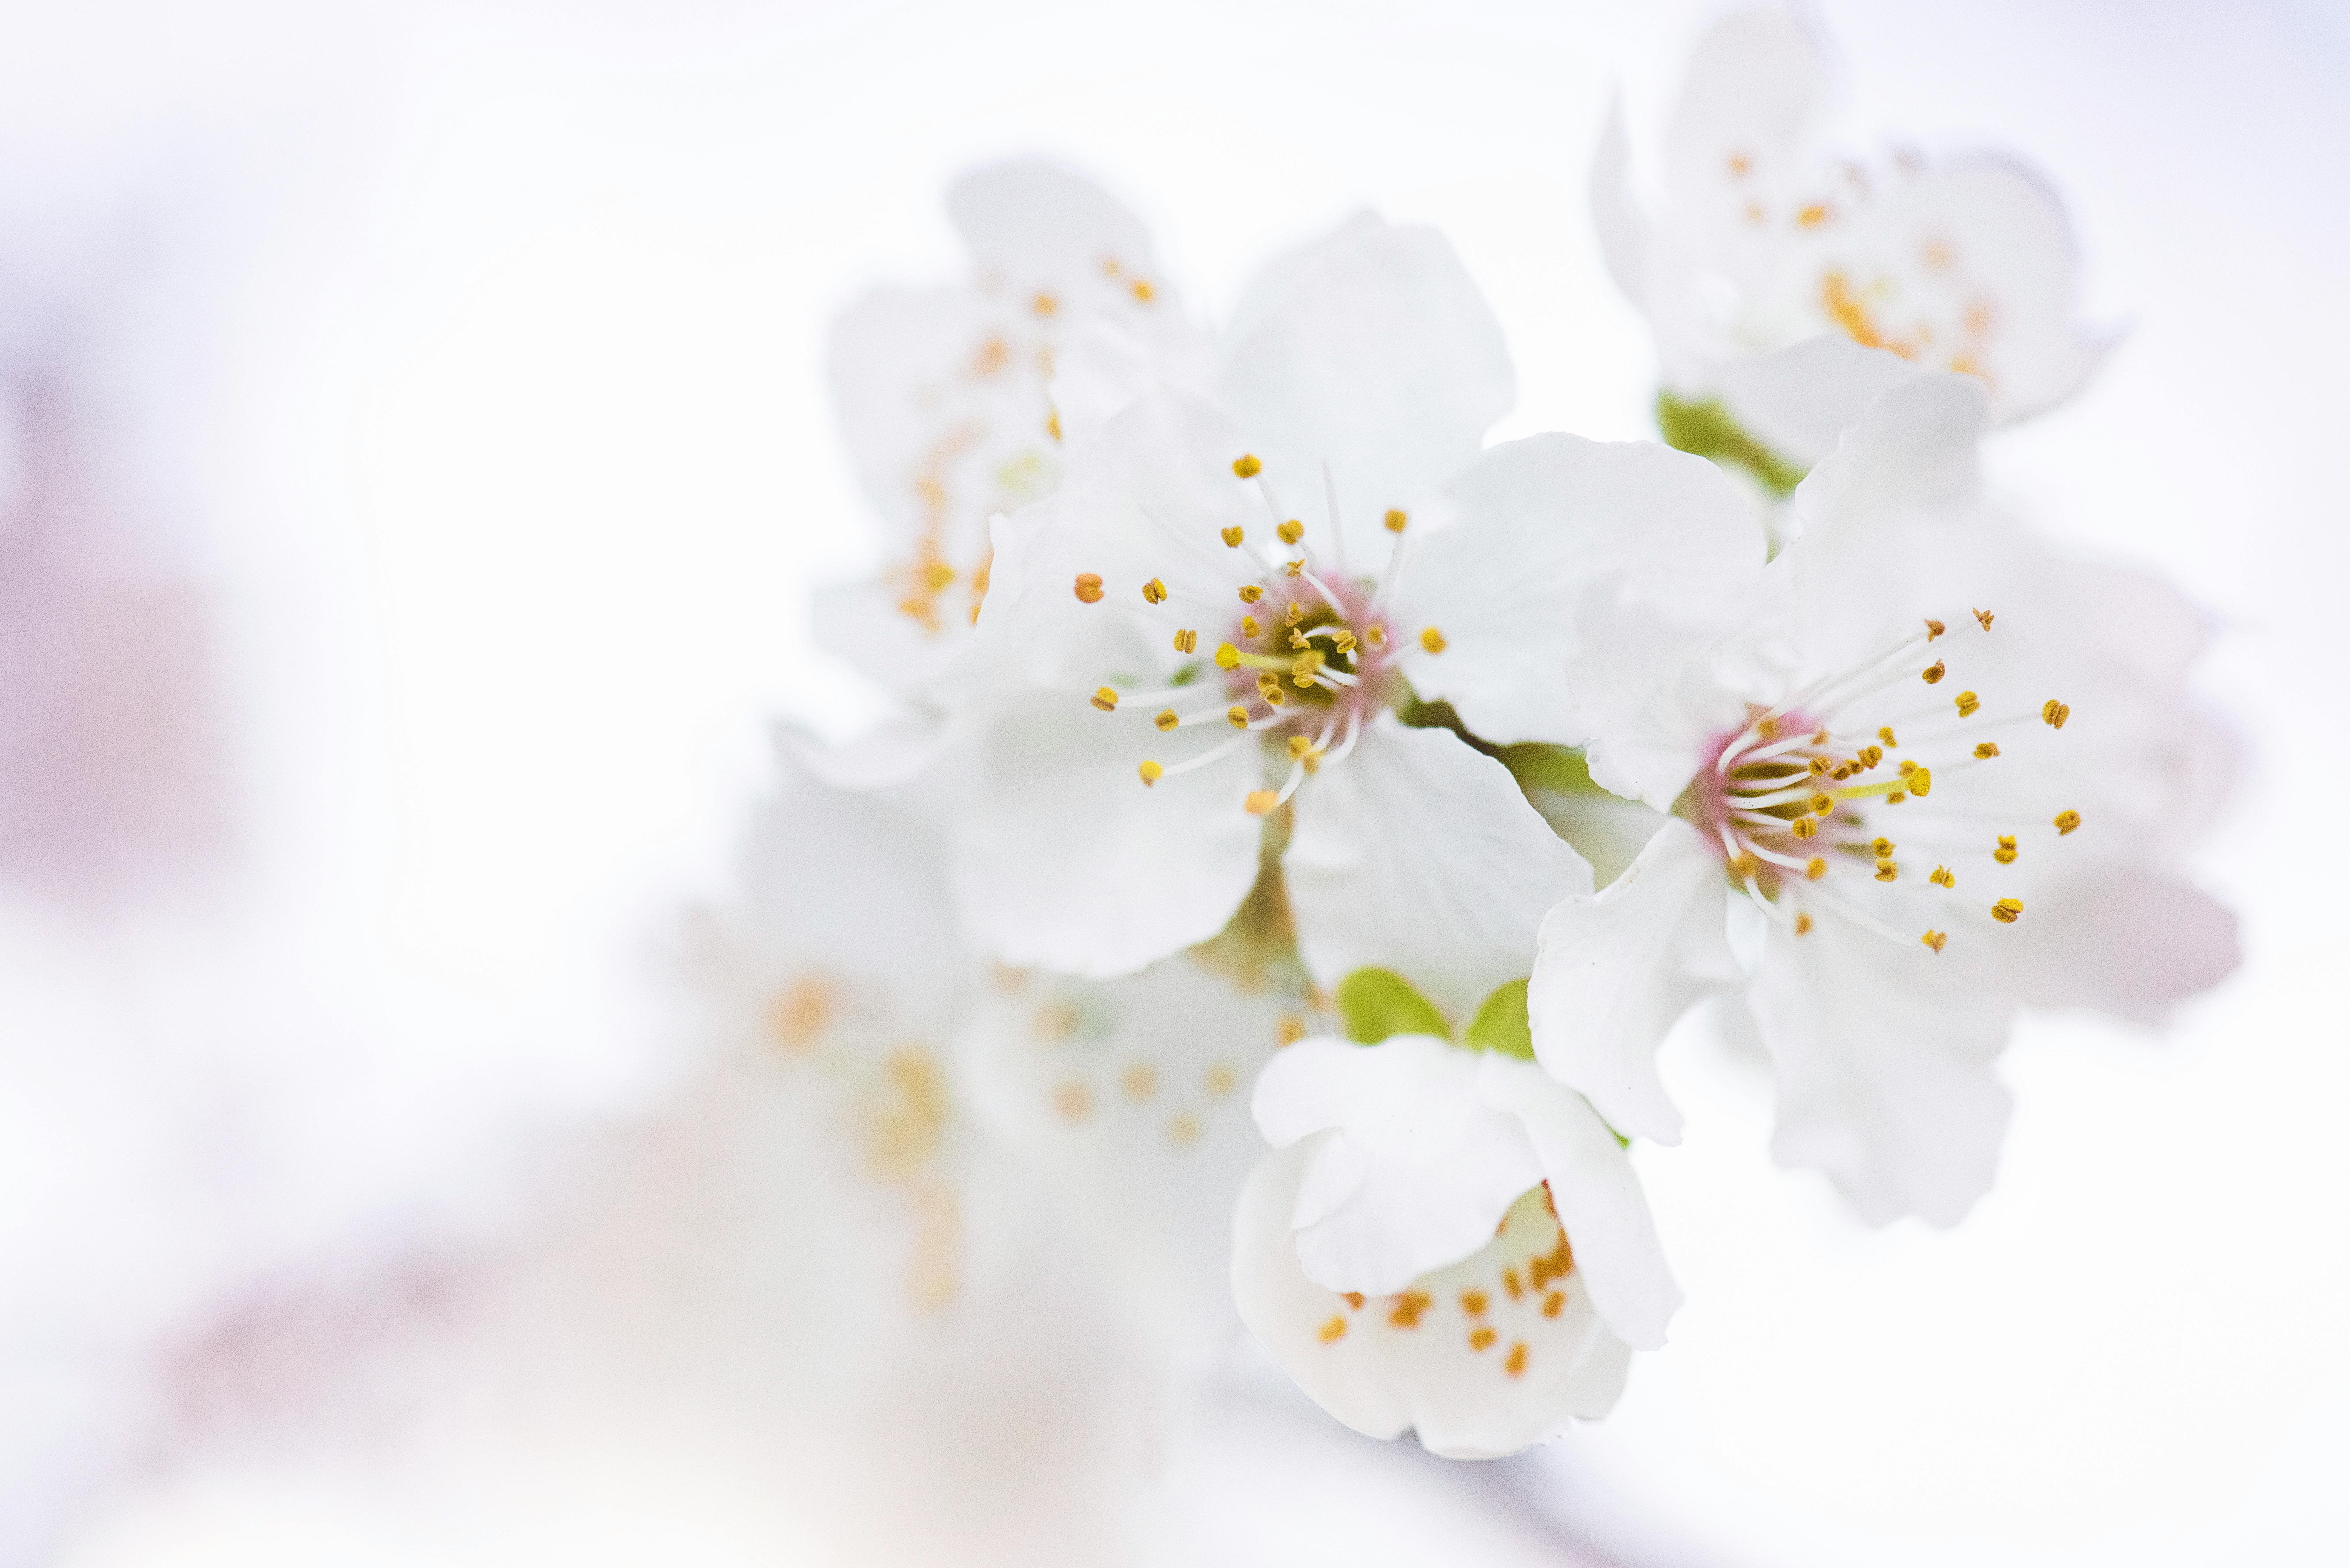 sping flowers with white background